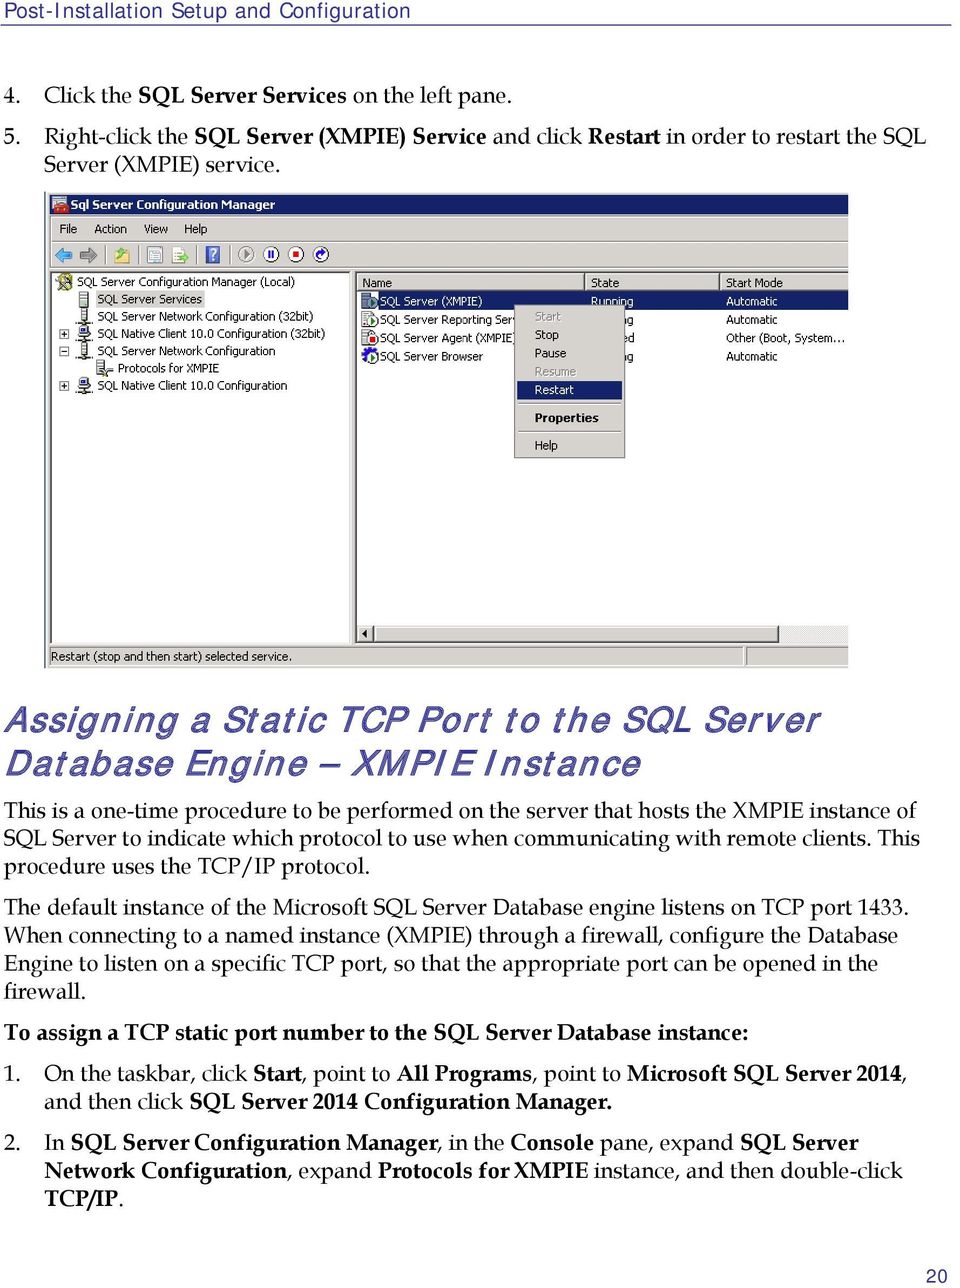 Assigning a Static TCP Port to the SQL Server Database Engine XMPIE Instance This is a one-time procedure to be performed on the server that hosts the XMPIE instance of SQL Server to indicate which